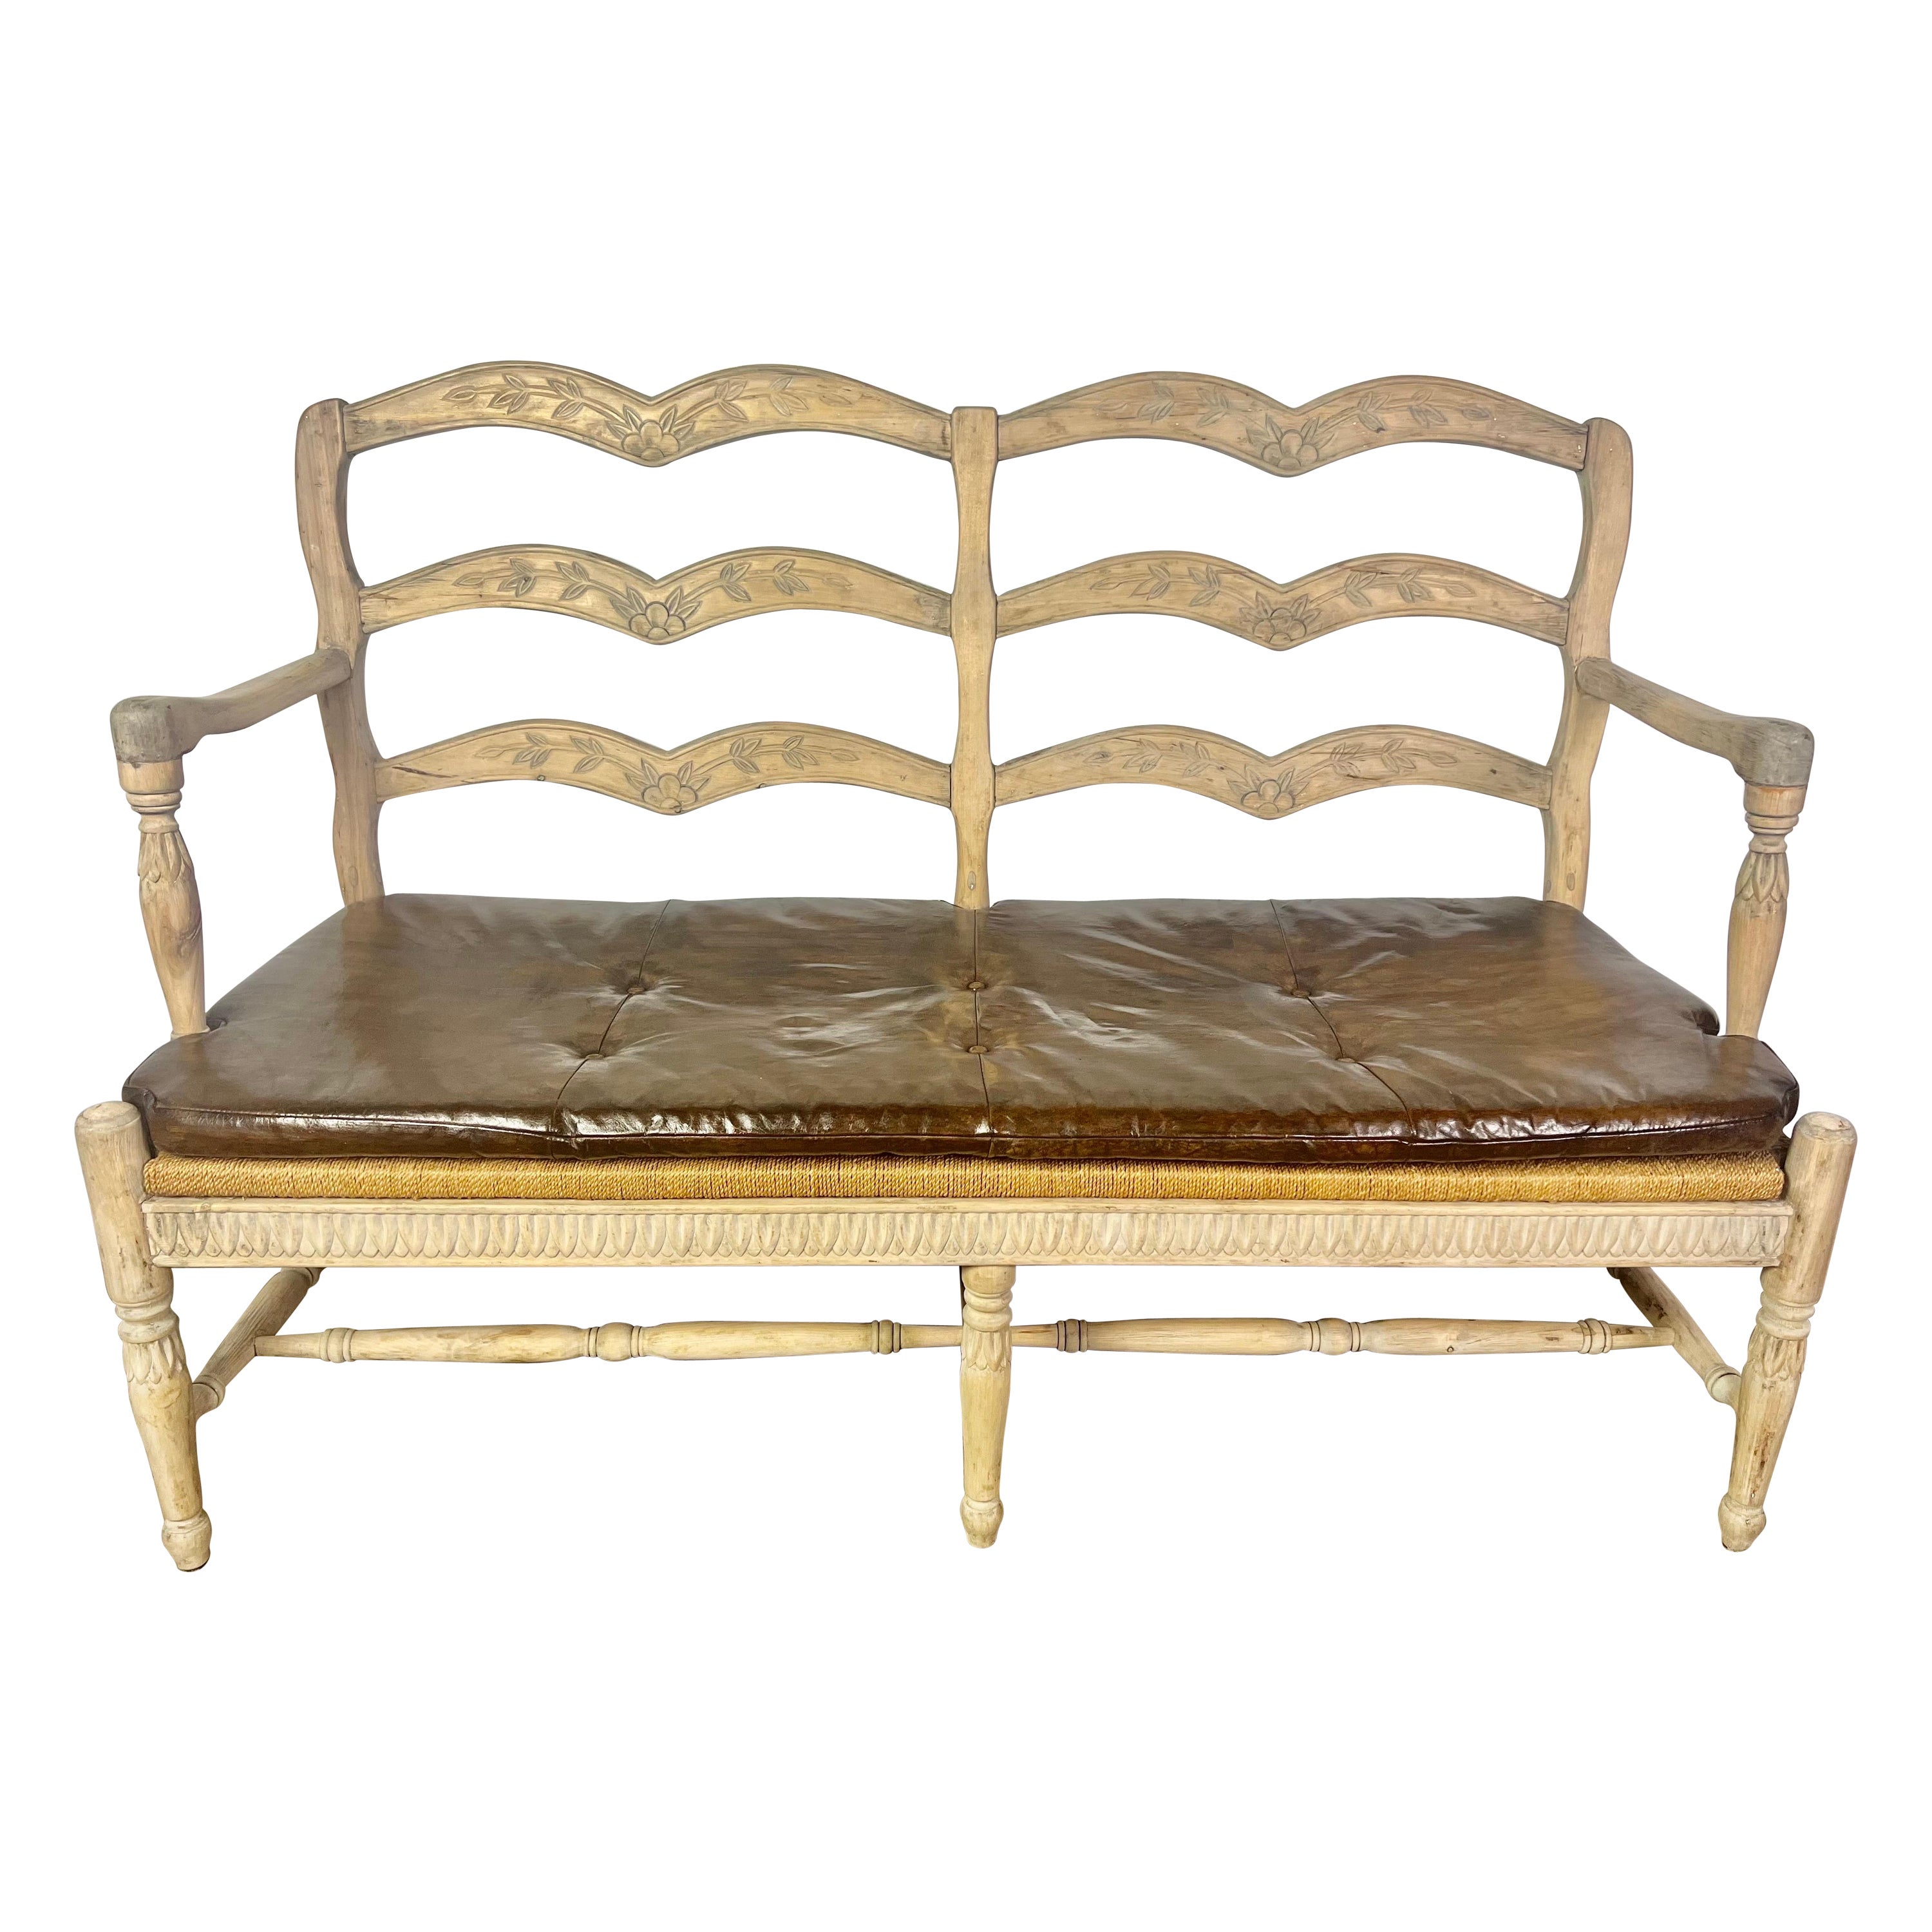 French Provincial Style Bench w/ Rush Seat & Leather Cushion For Sale